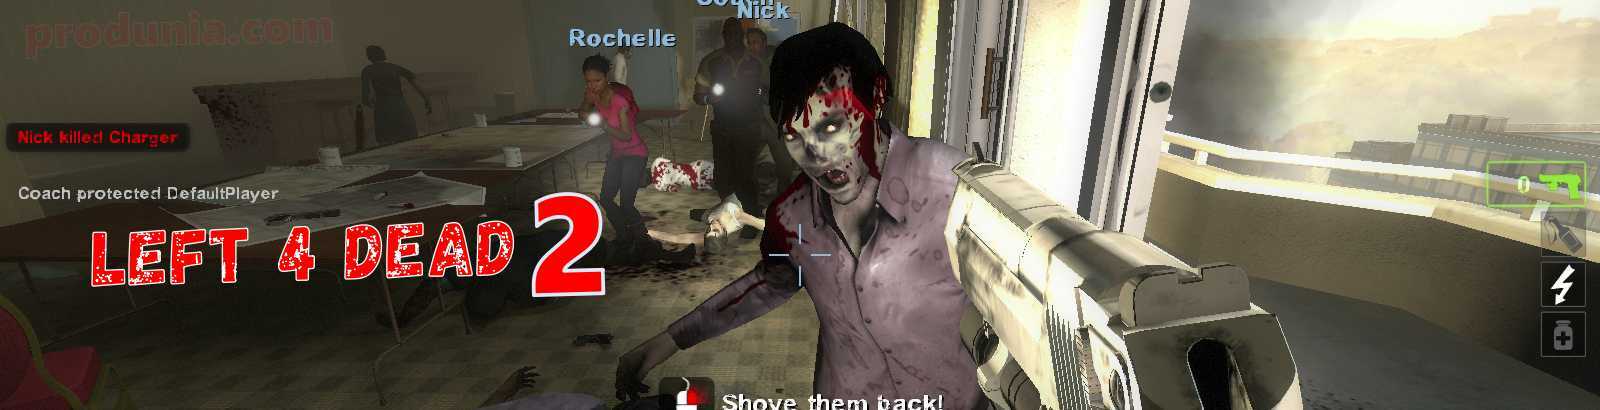 Left 4 dead 2 Download for pc just in 2 GB [ Highly compressed ]